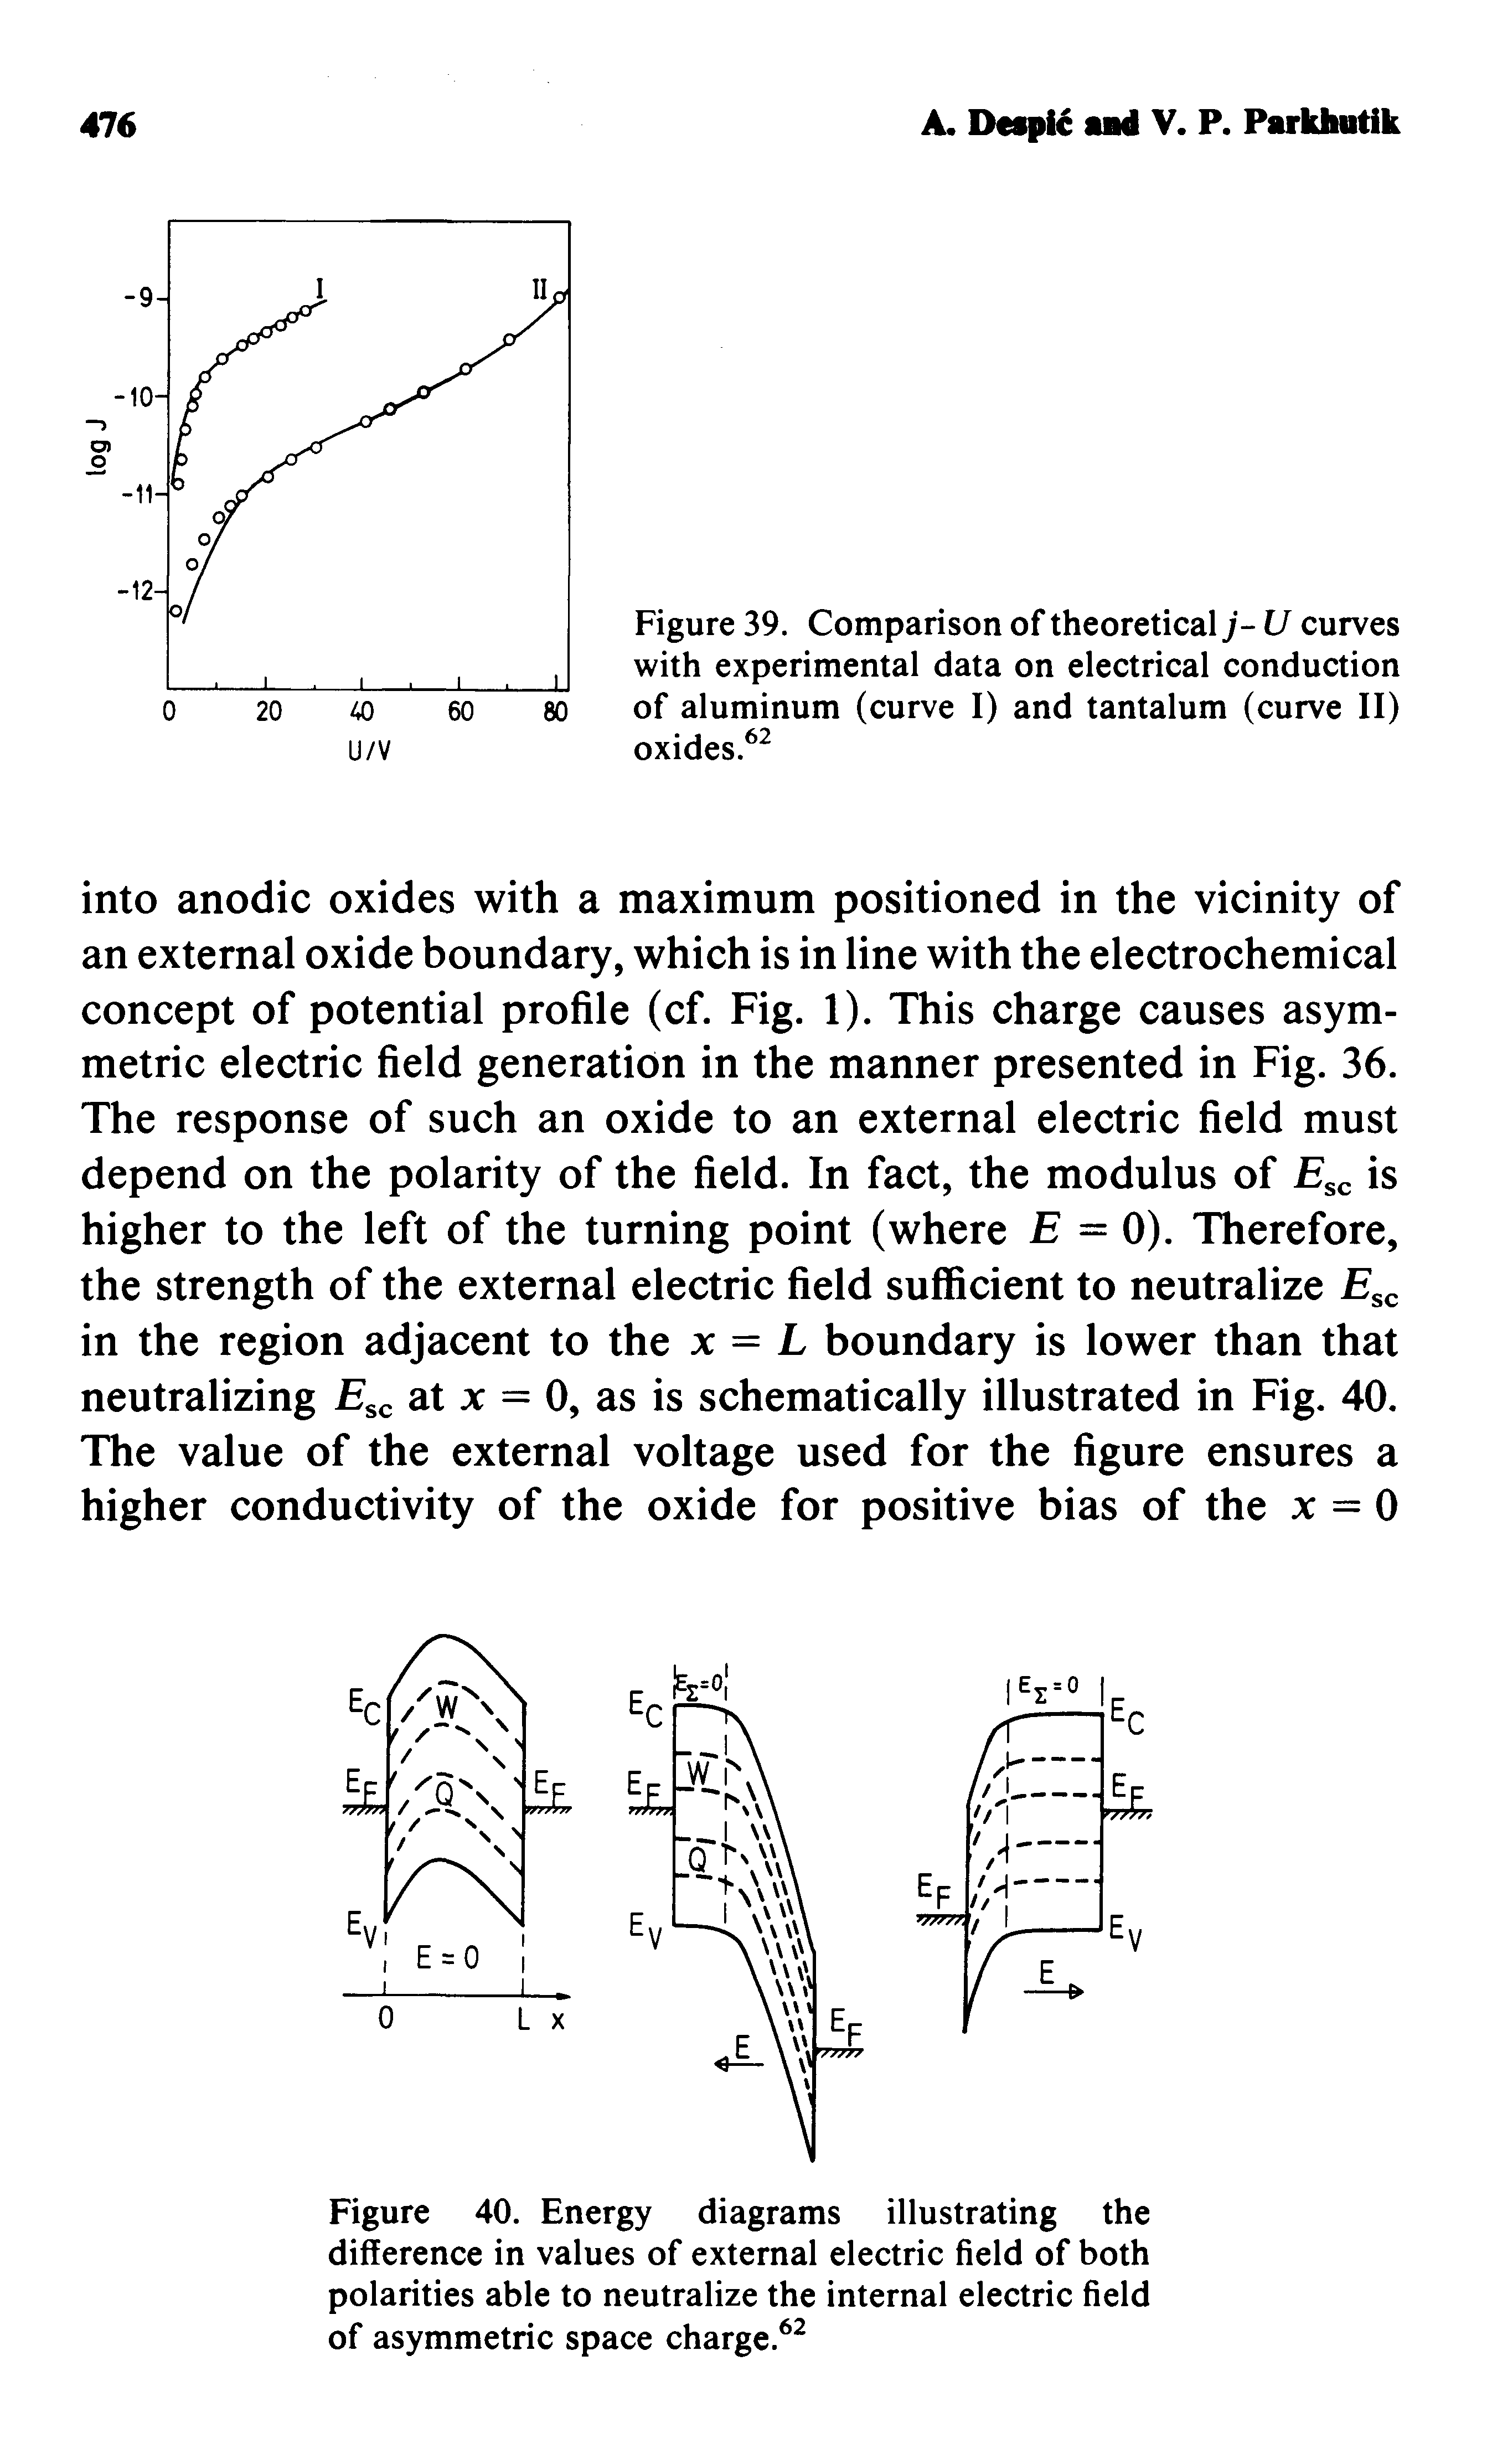 Figure 40. Energy diagrams illustrating the difference in values of external electric field of both polarities able to neutralize the internal electric field of asymmetric space charge.62...